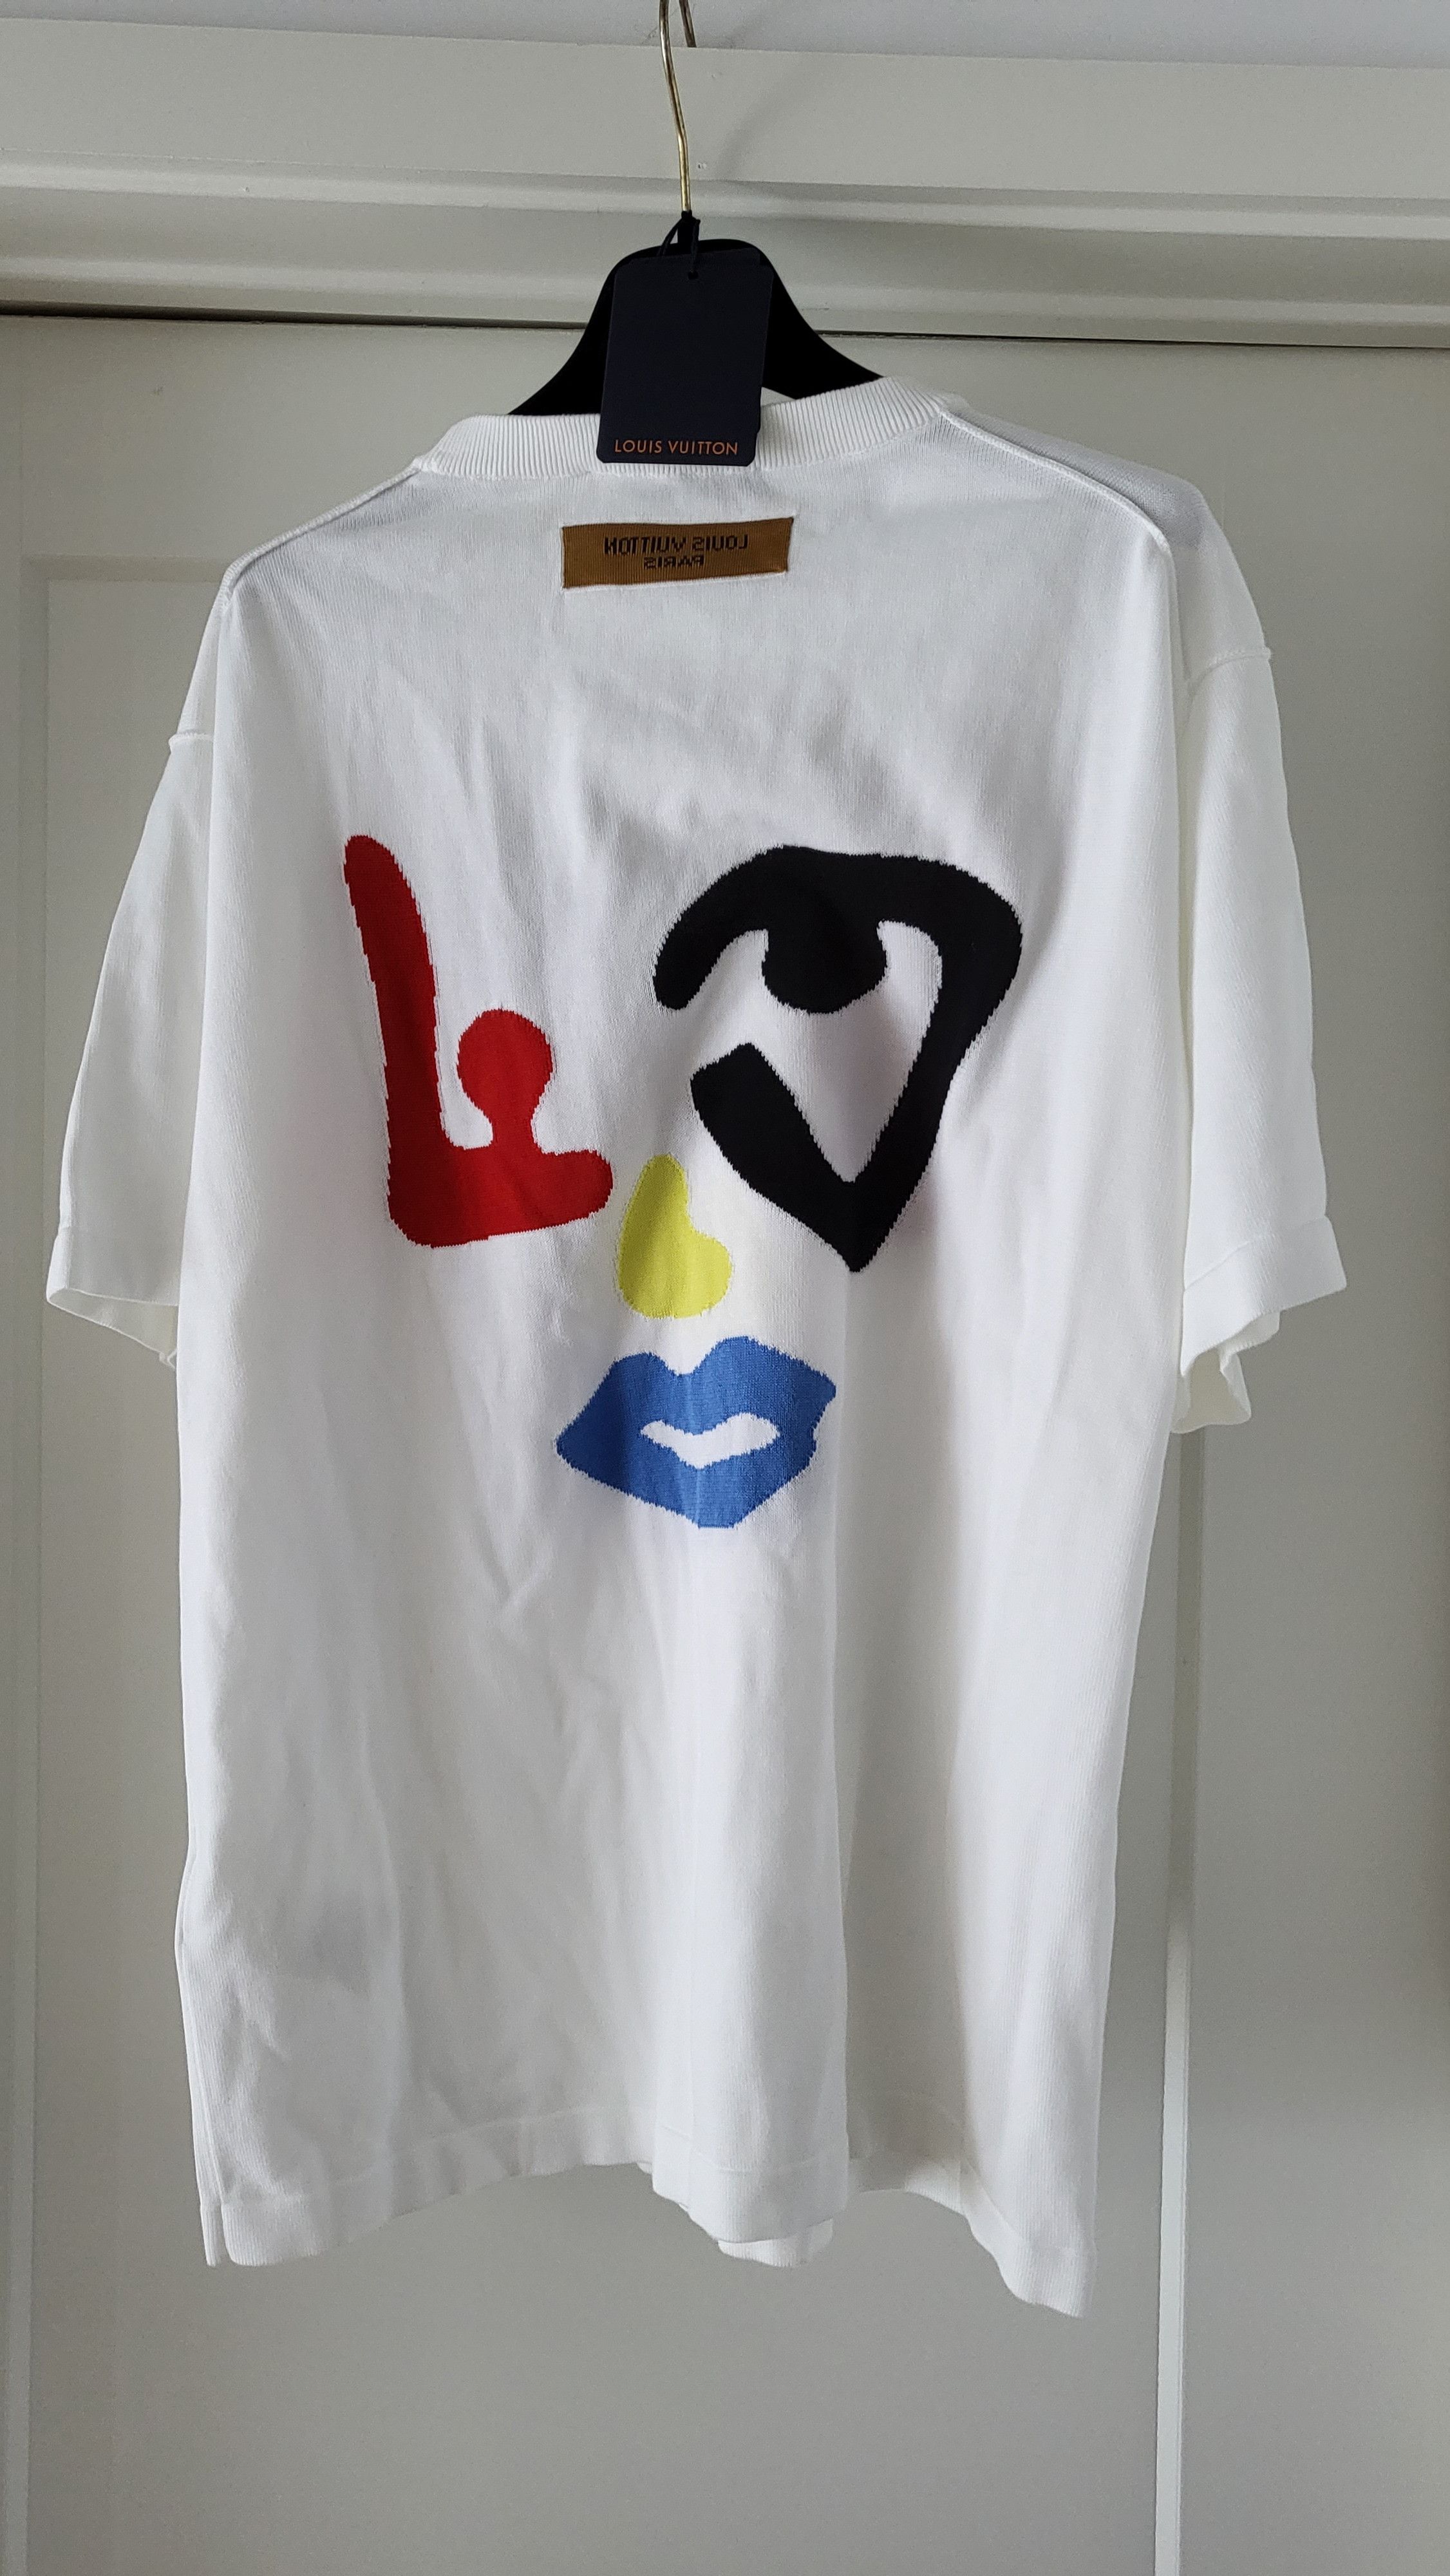 Louis Vuitton Printed Faces Classic Shirt HAS62WZWF652 from Louis